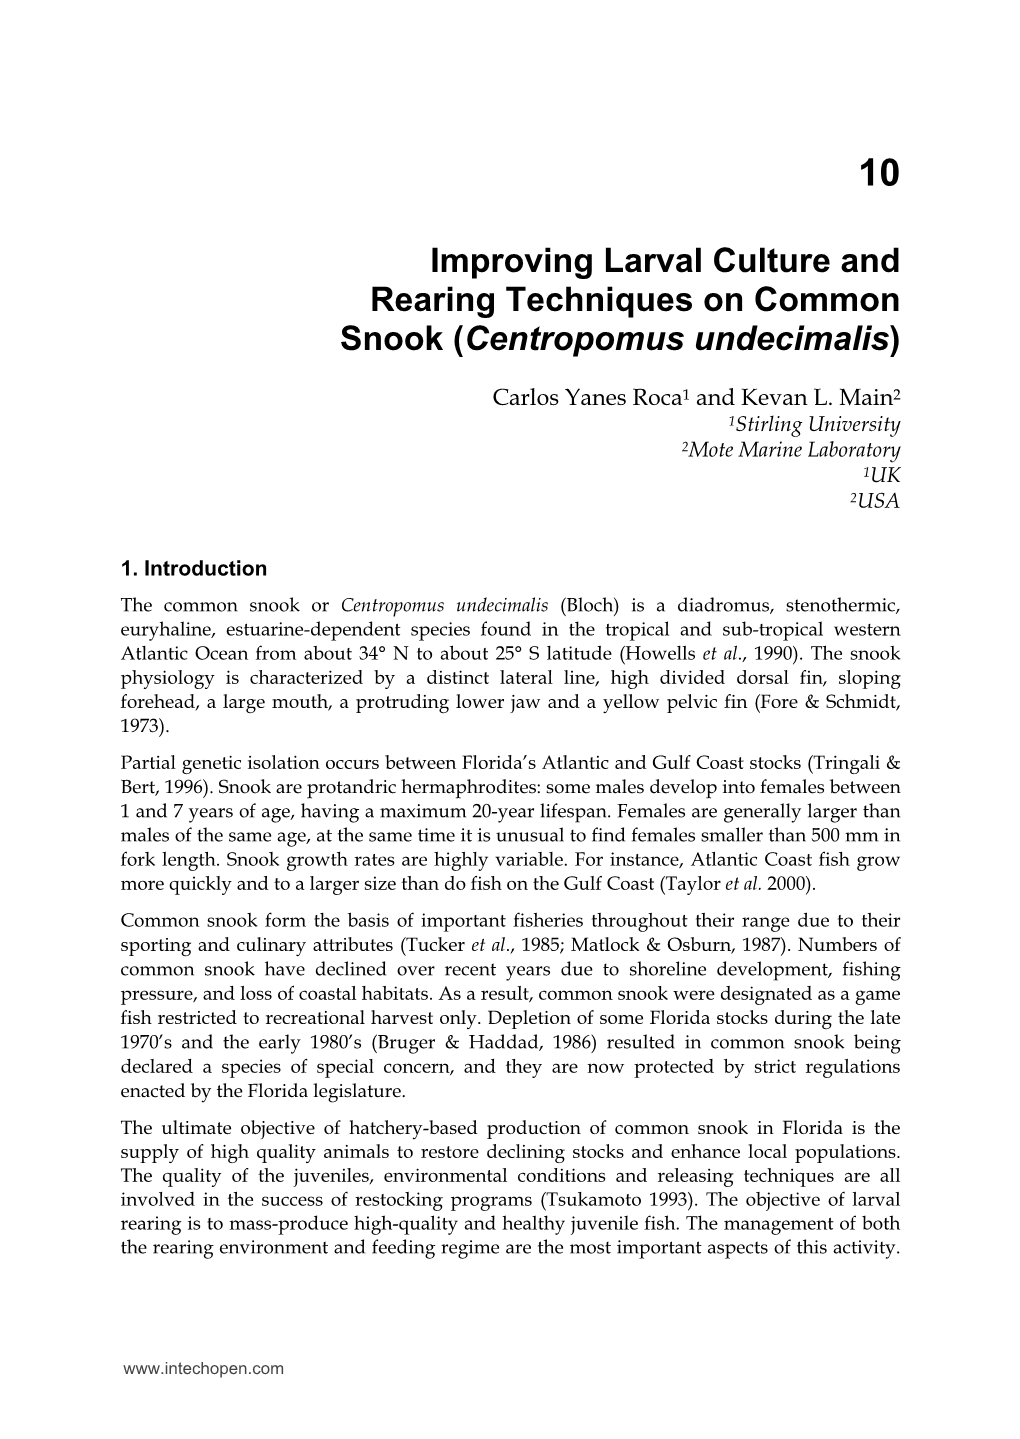 Improving Larval Culture and Rearing Techniques on Common Snook (Centropomus Undecimalis)